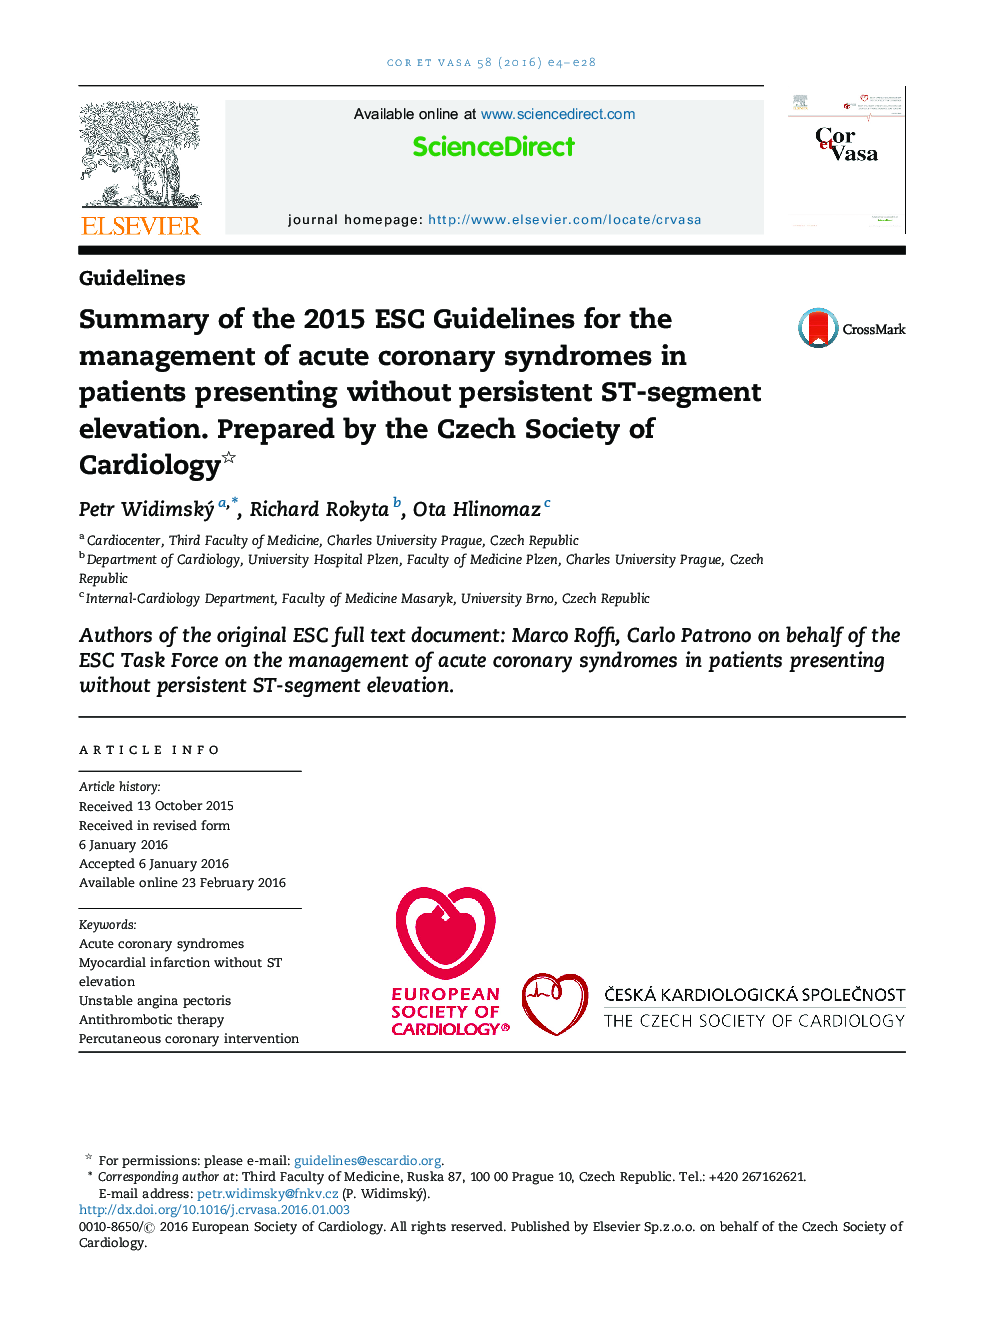 Summary of the 2015 ESC Guidelines for the management of acute coronary syndromes in patients presenting without persistent ST-segment elevation. Prepared by the Czech Society of Cardiology